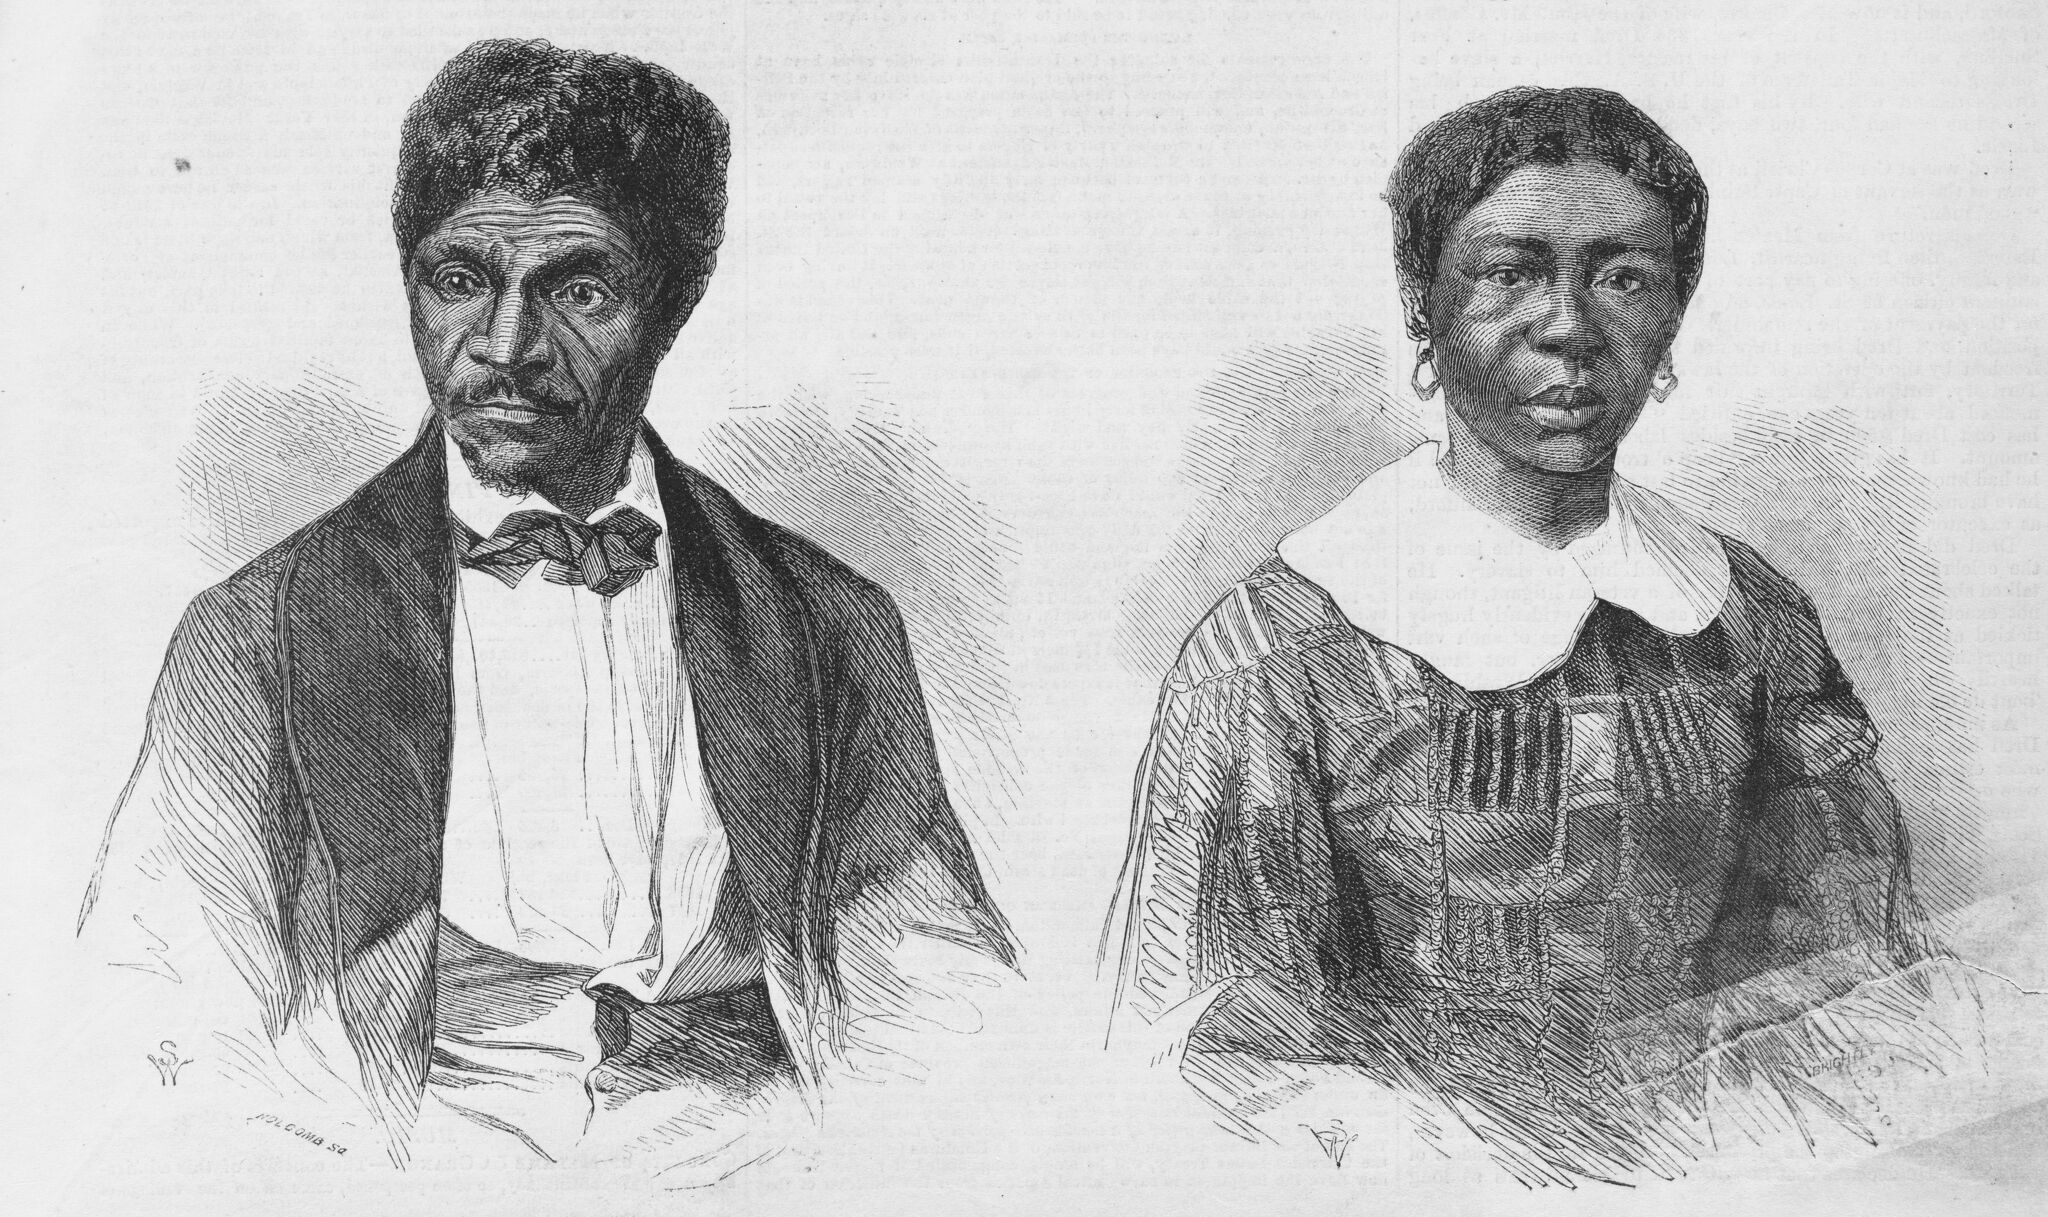 Dred Scott fought for his freedom in famous court case